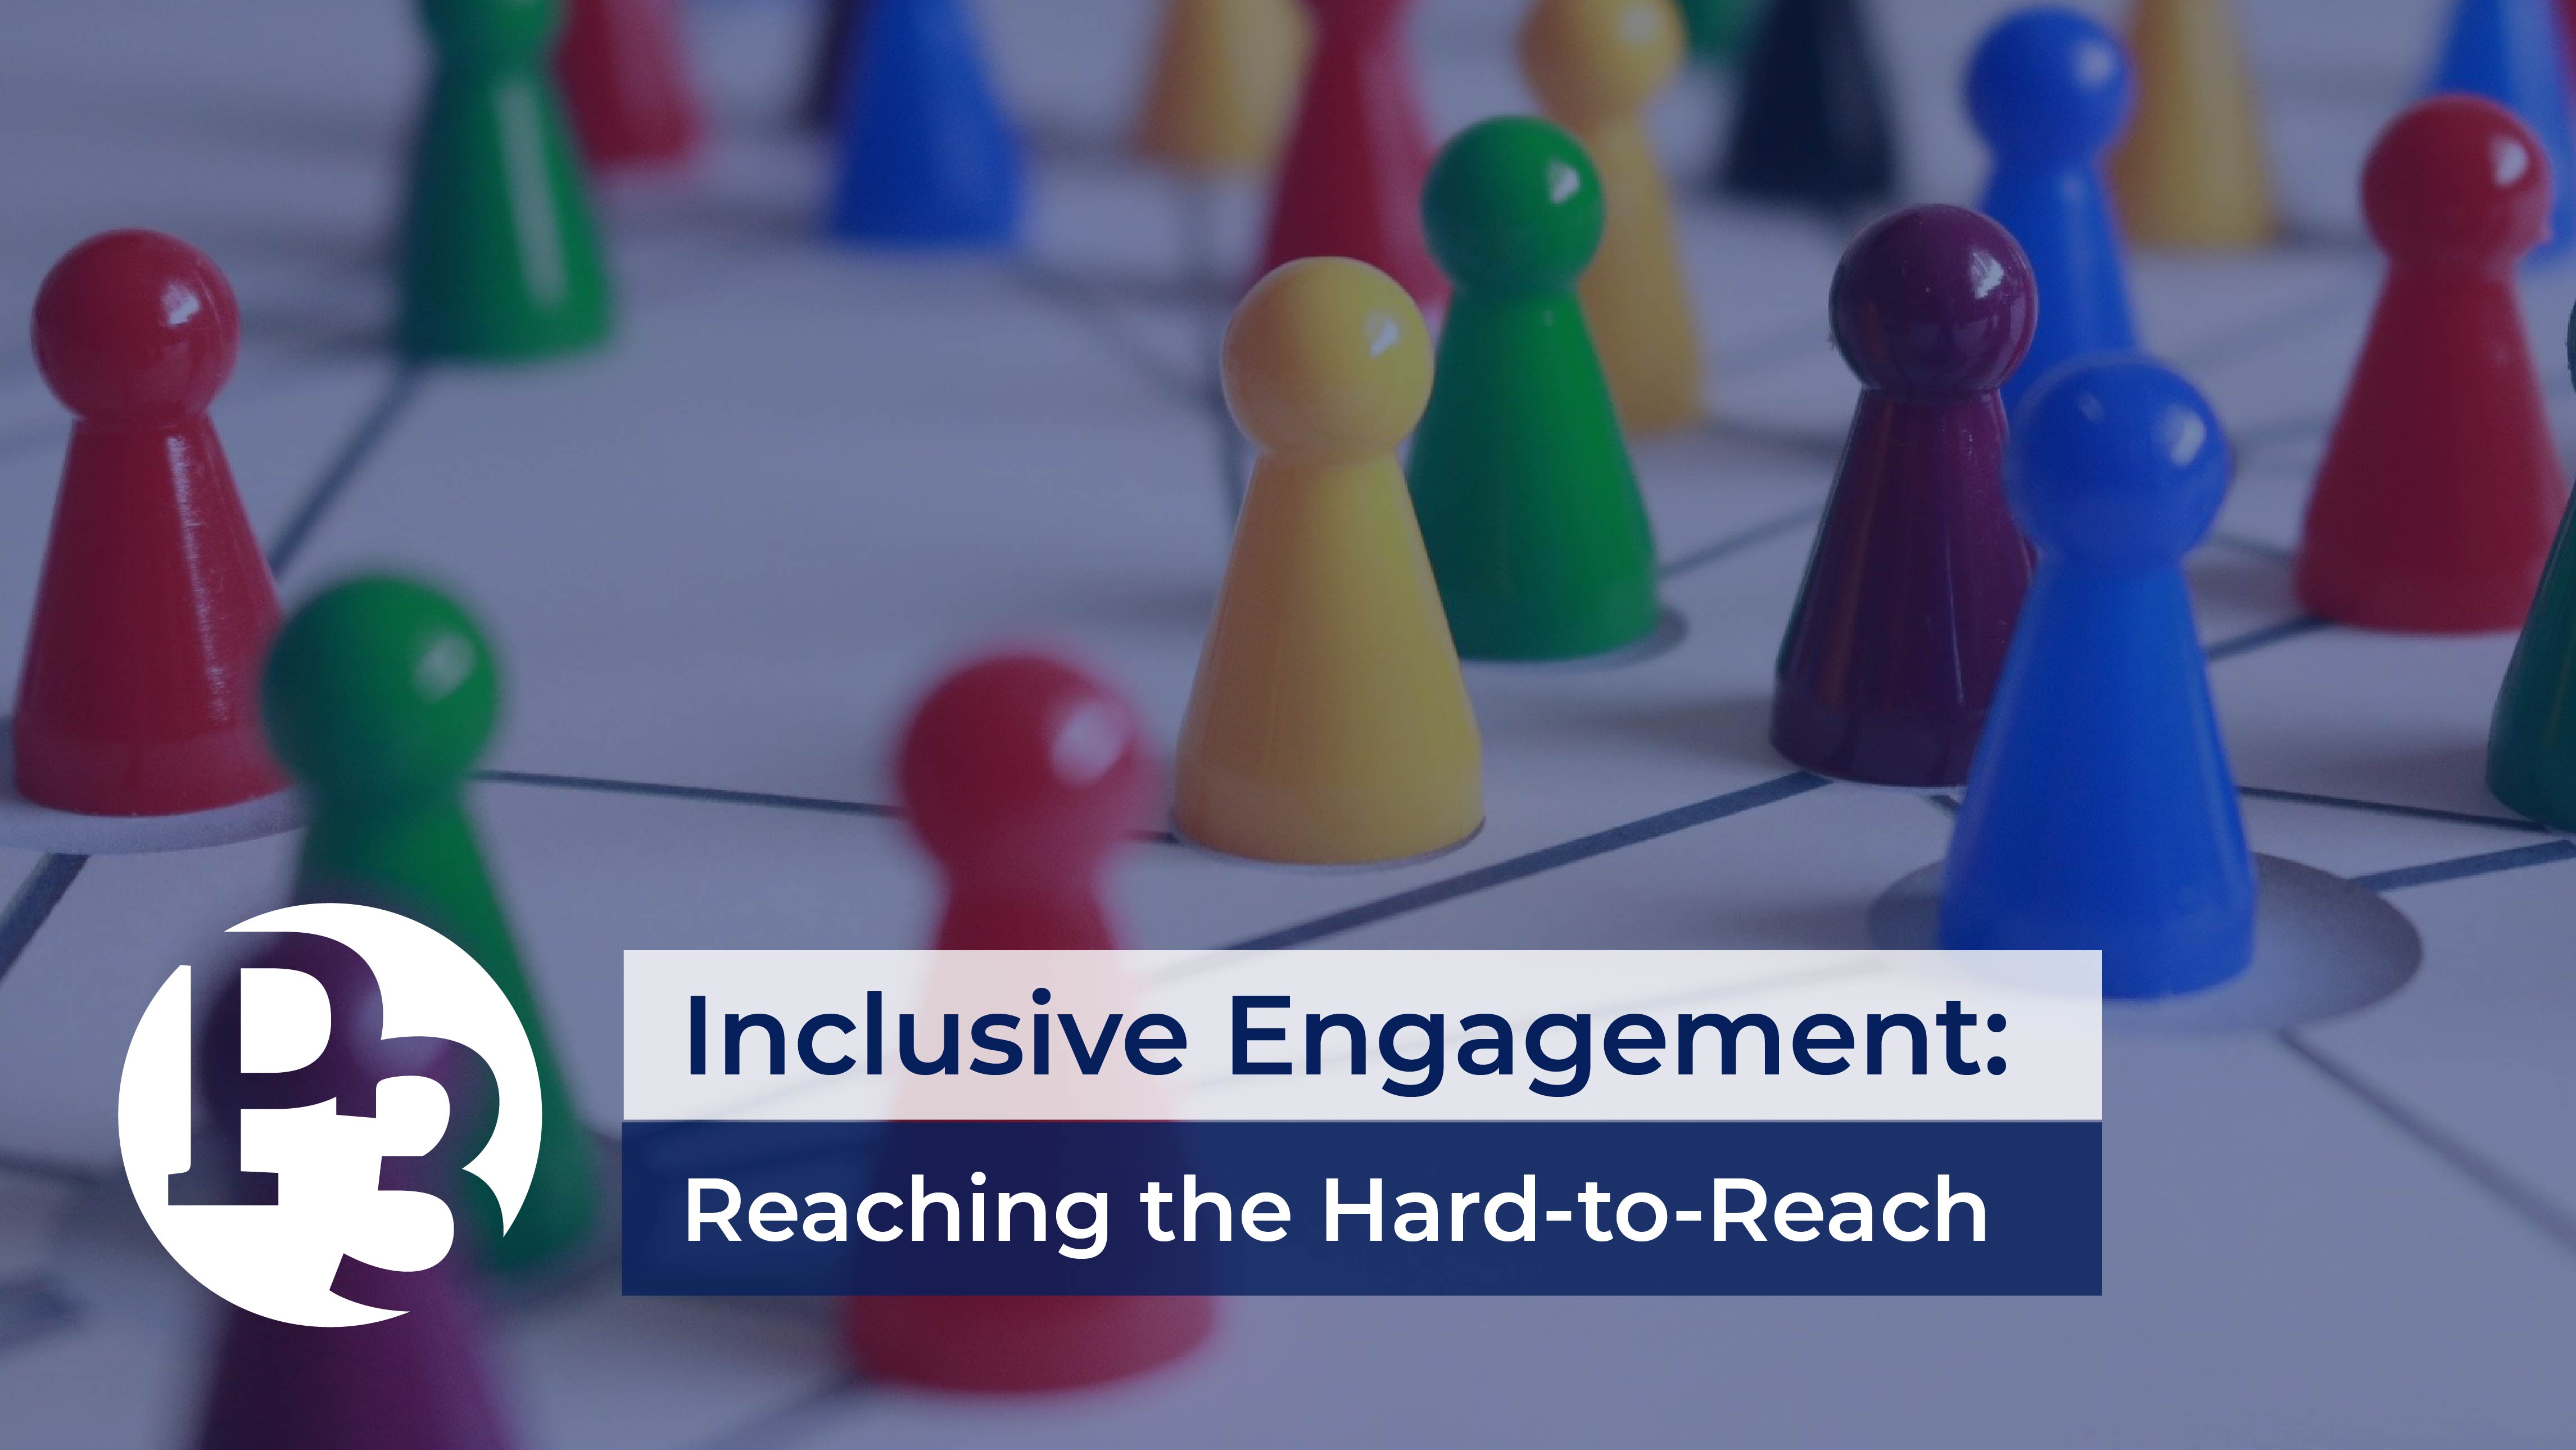 Inclusive Engagement: Reaching the Hard-to-Reach